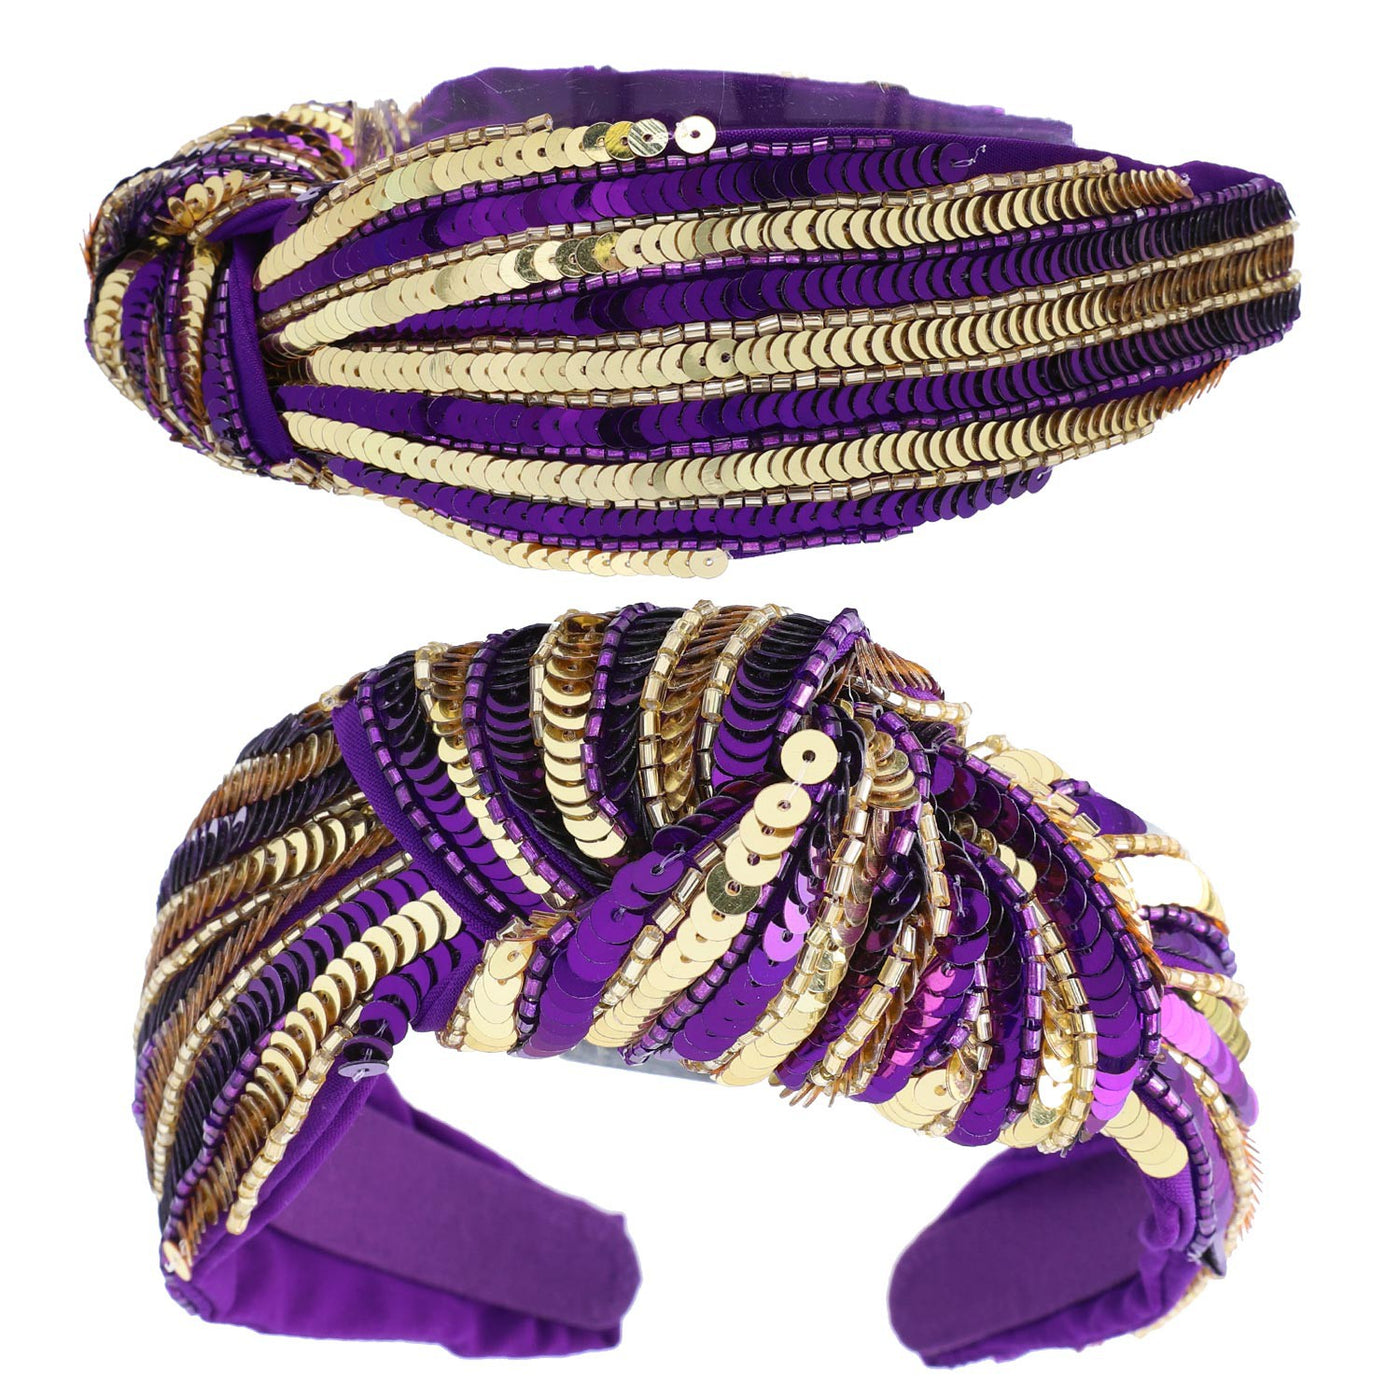 TEAM STRIPES SEQUIN EMBELLISHED KNOTTED HEADBAND - PURPLE AND GOLD